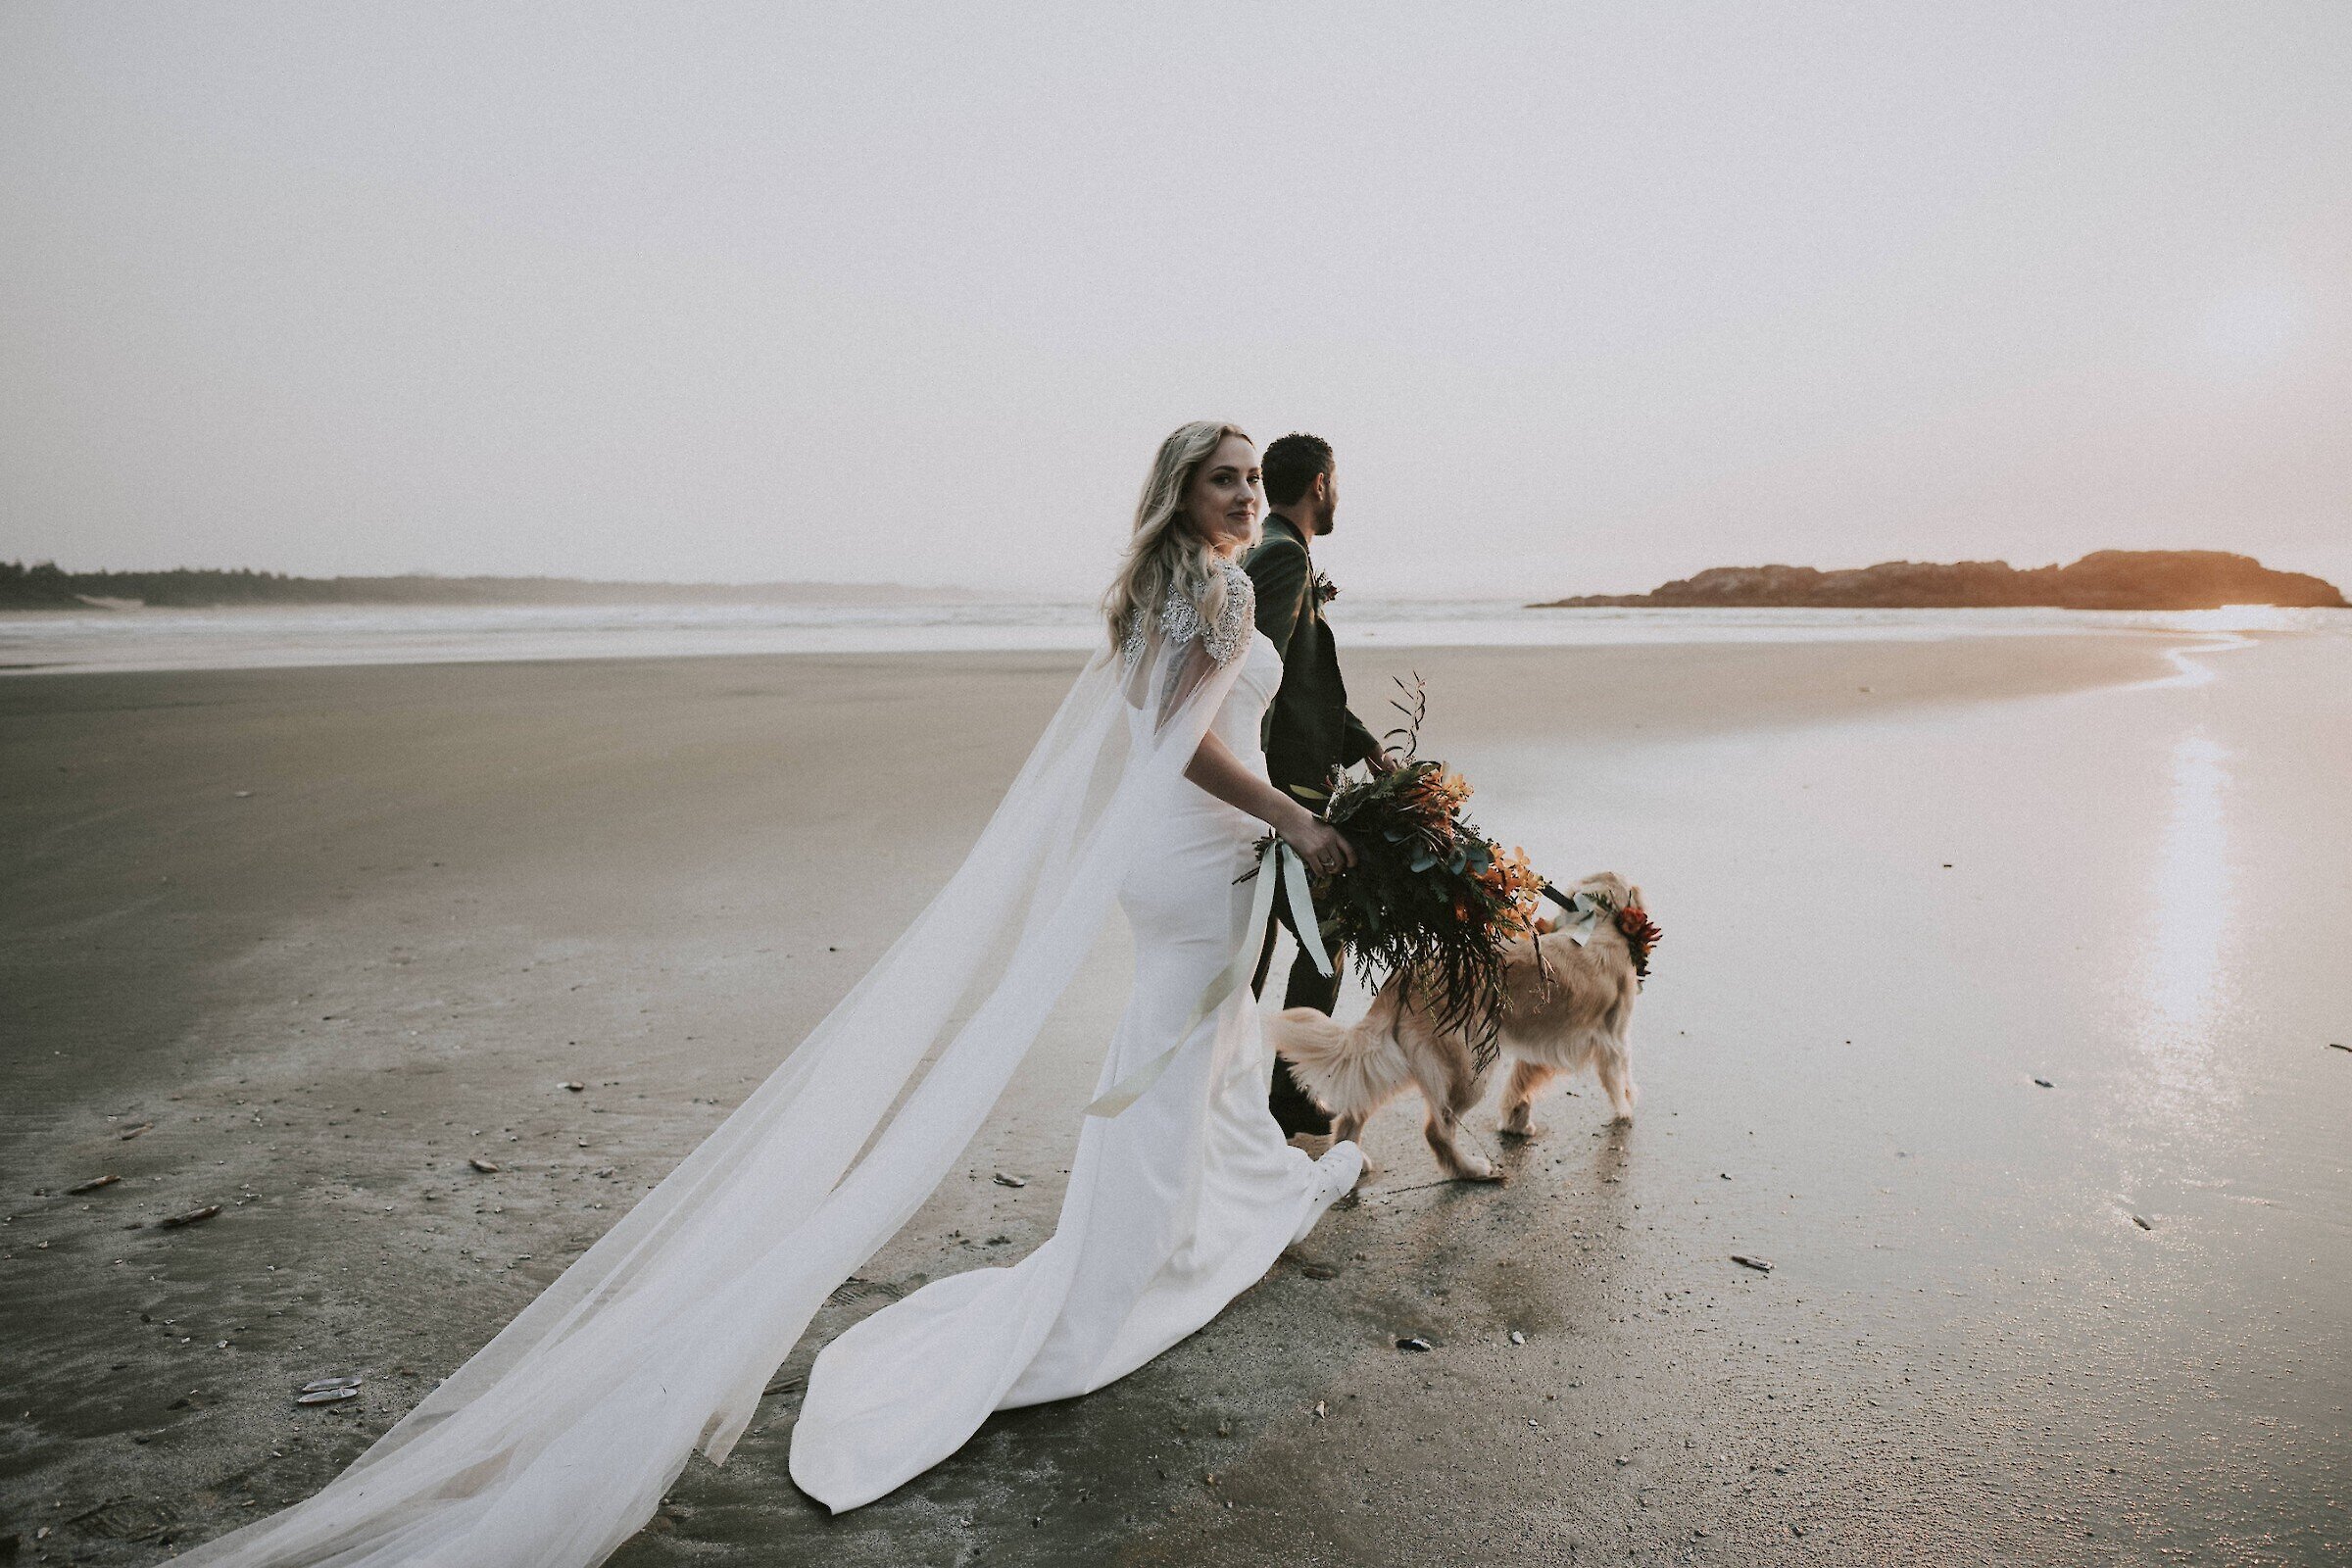 Bride, groom, and dog walking on the beach